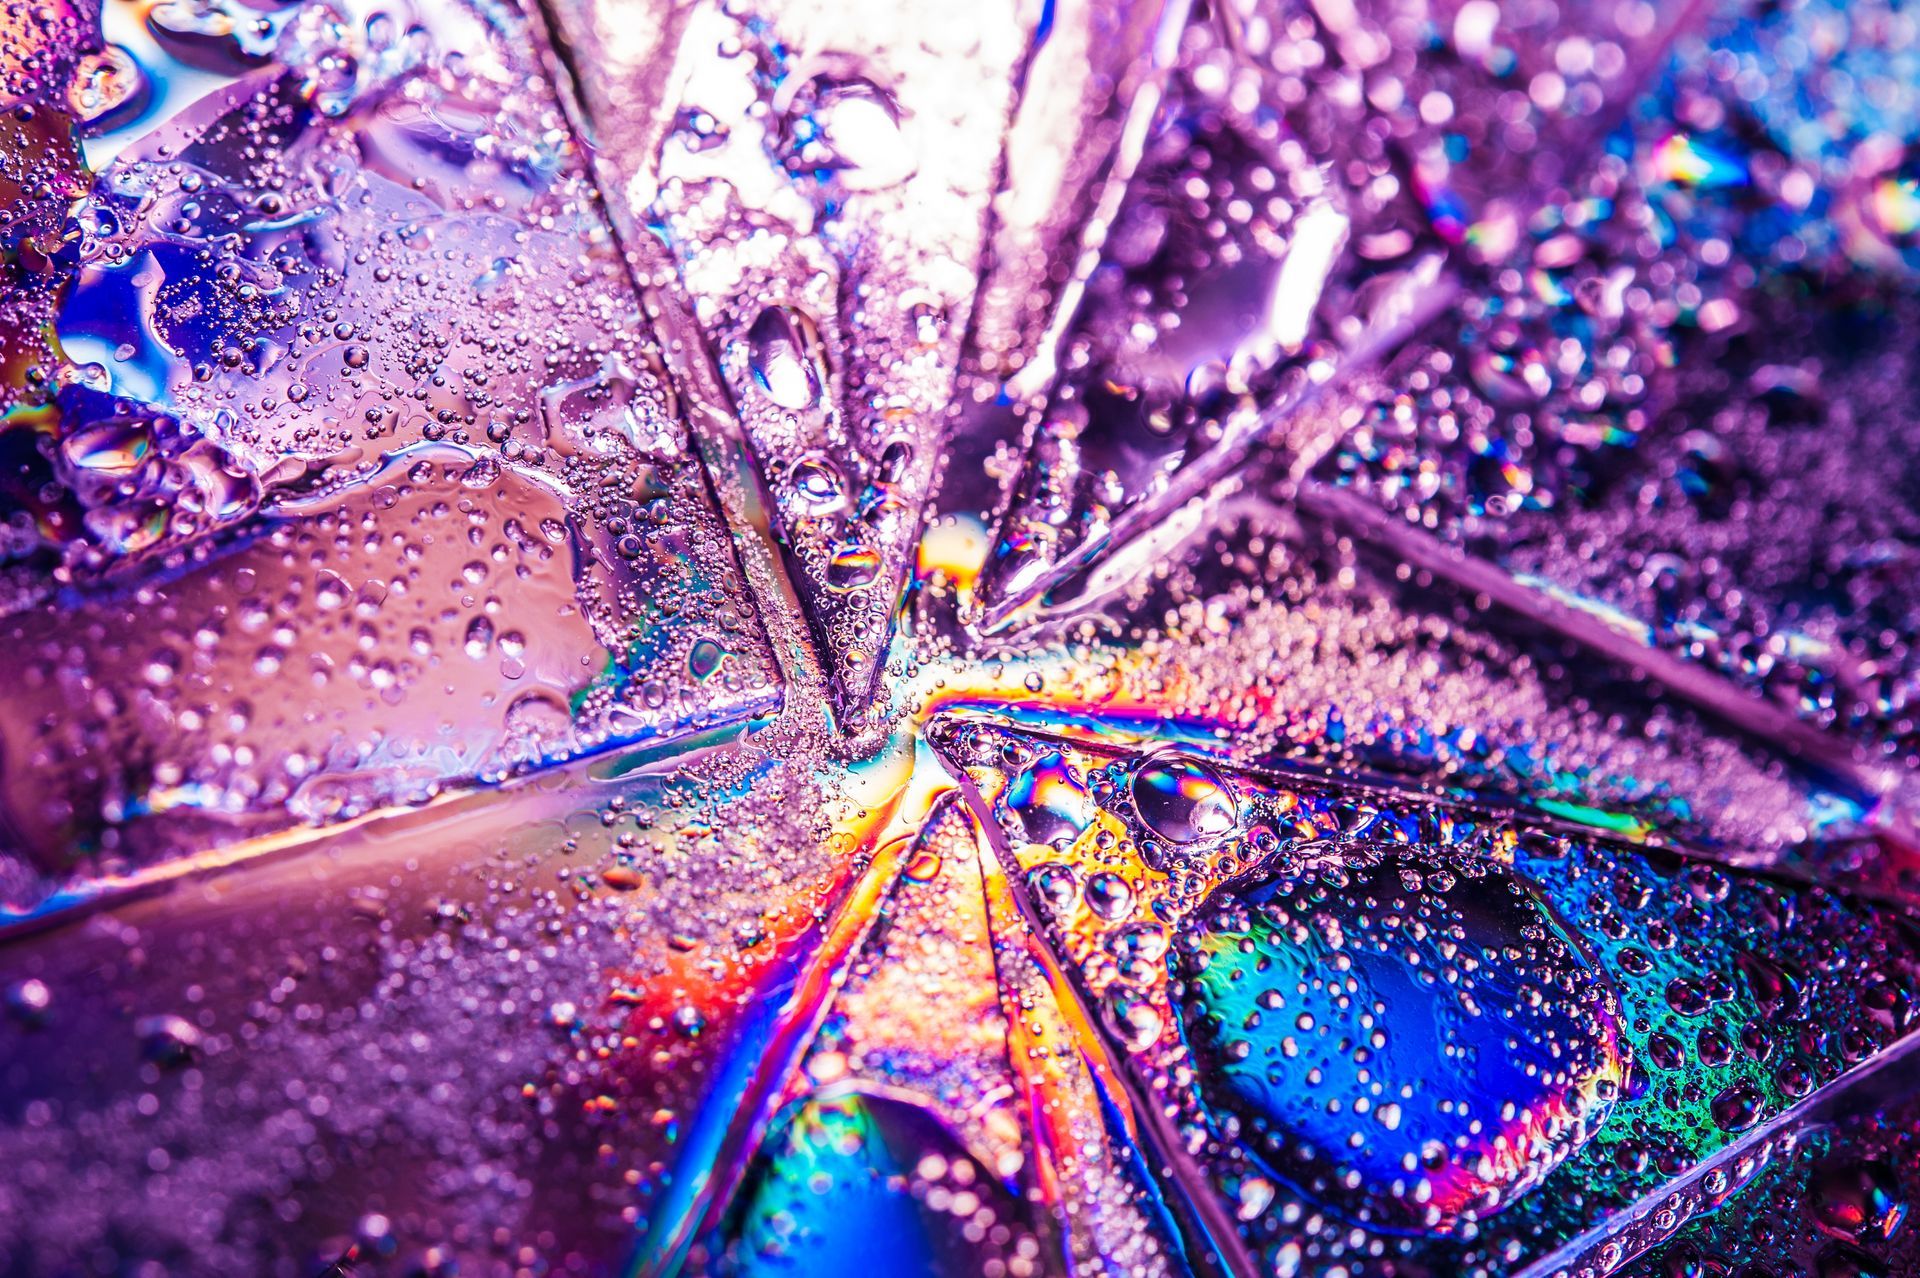 Ice shards up close with neon tints